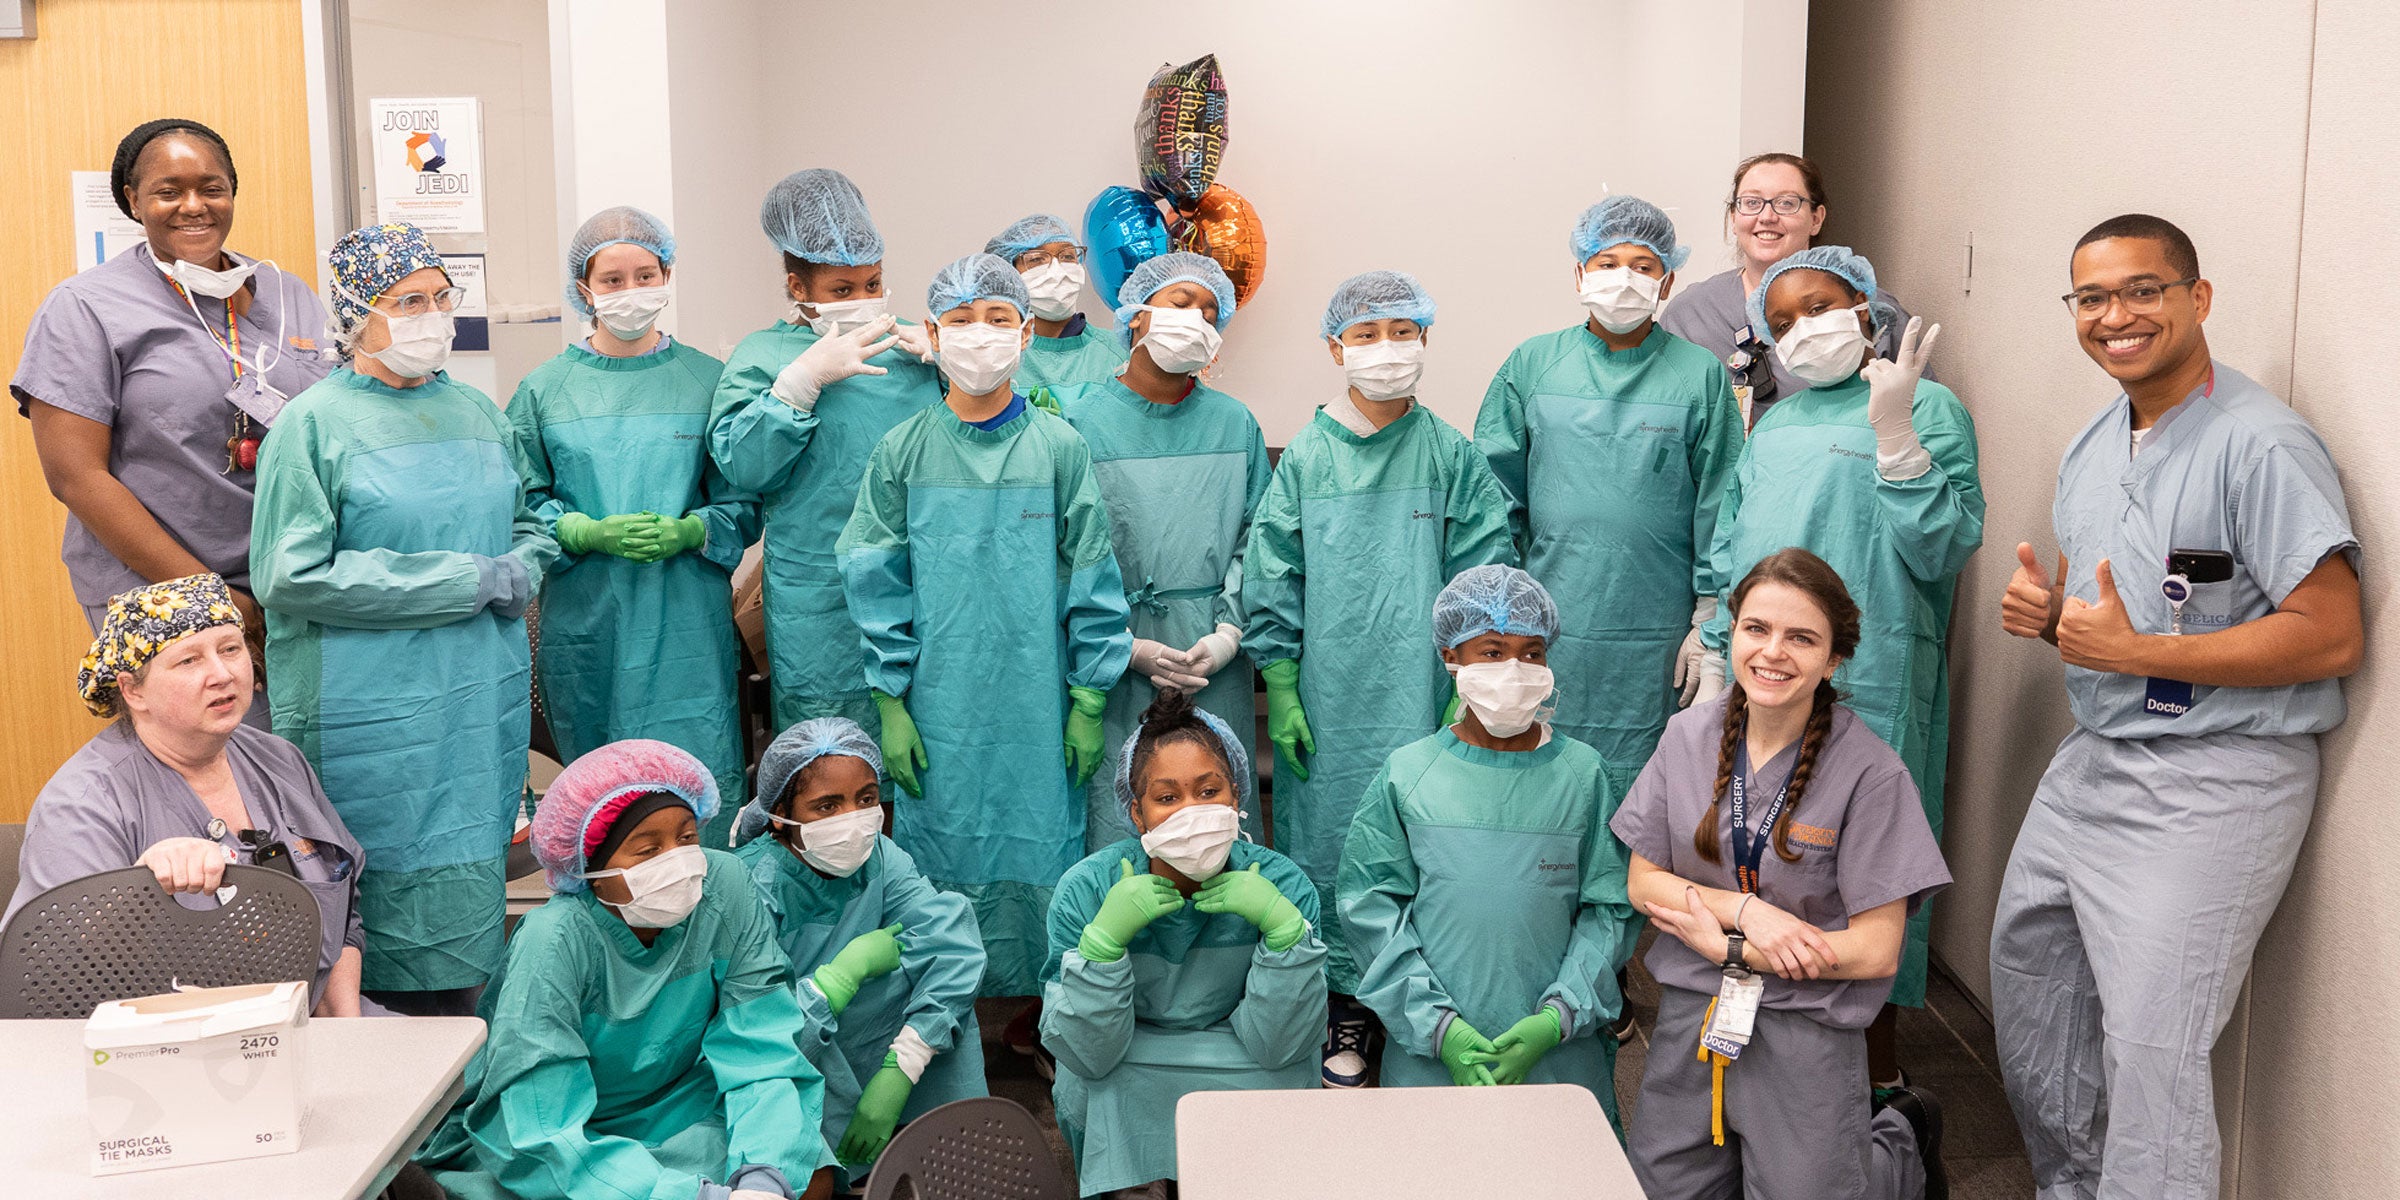 The entire group decked out in their surgical garb thanks to the operating room nurses.